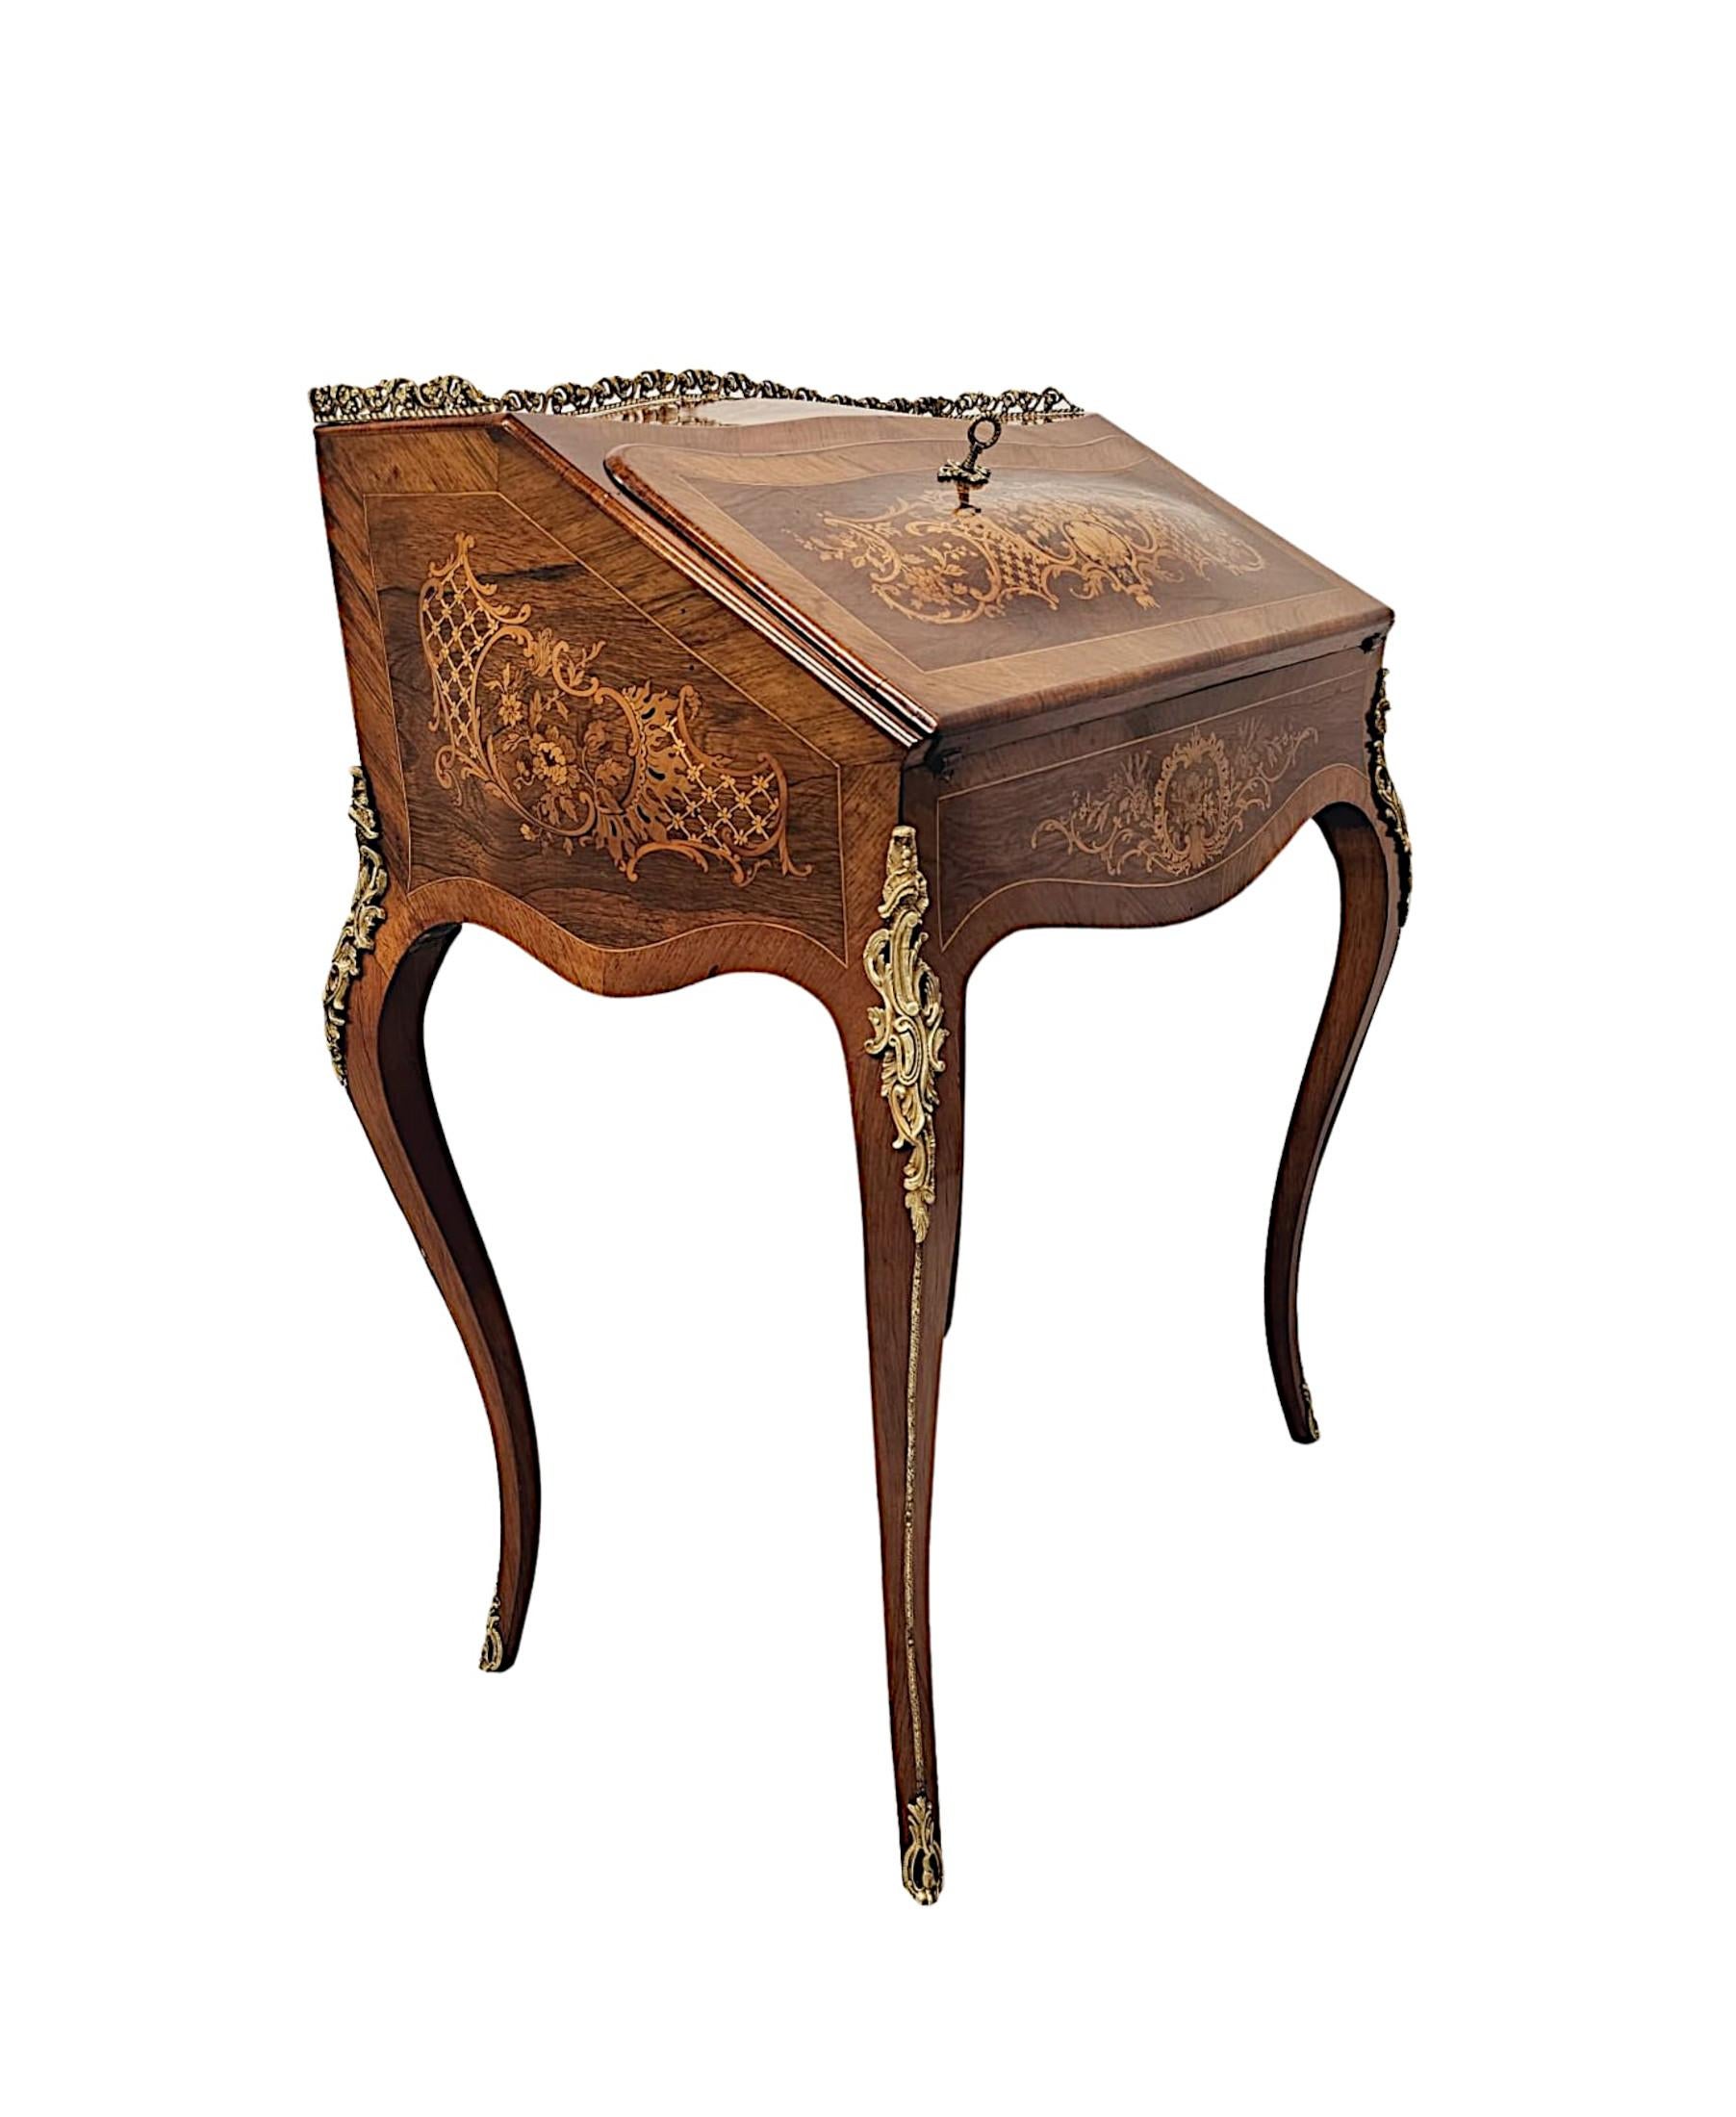 A Very Fine 19th Century Marquetry Inlaid Bureau Du Dame In Good Condition For Sale In Dublin, IE